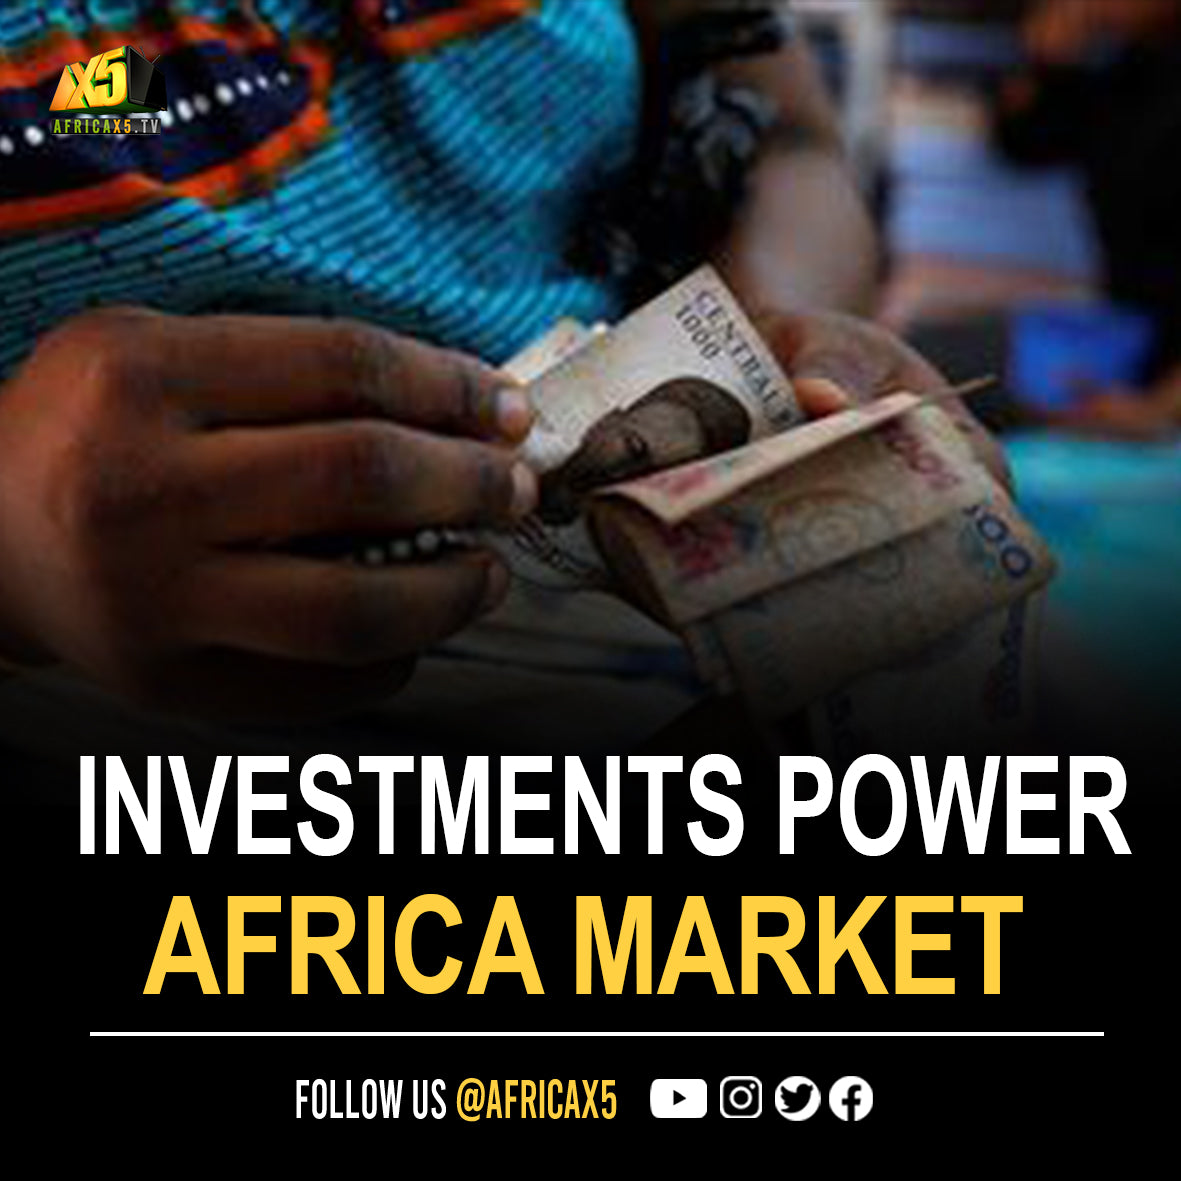 Promoting investment to power Africa’s single market